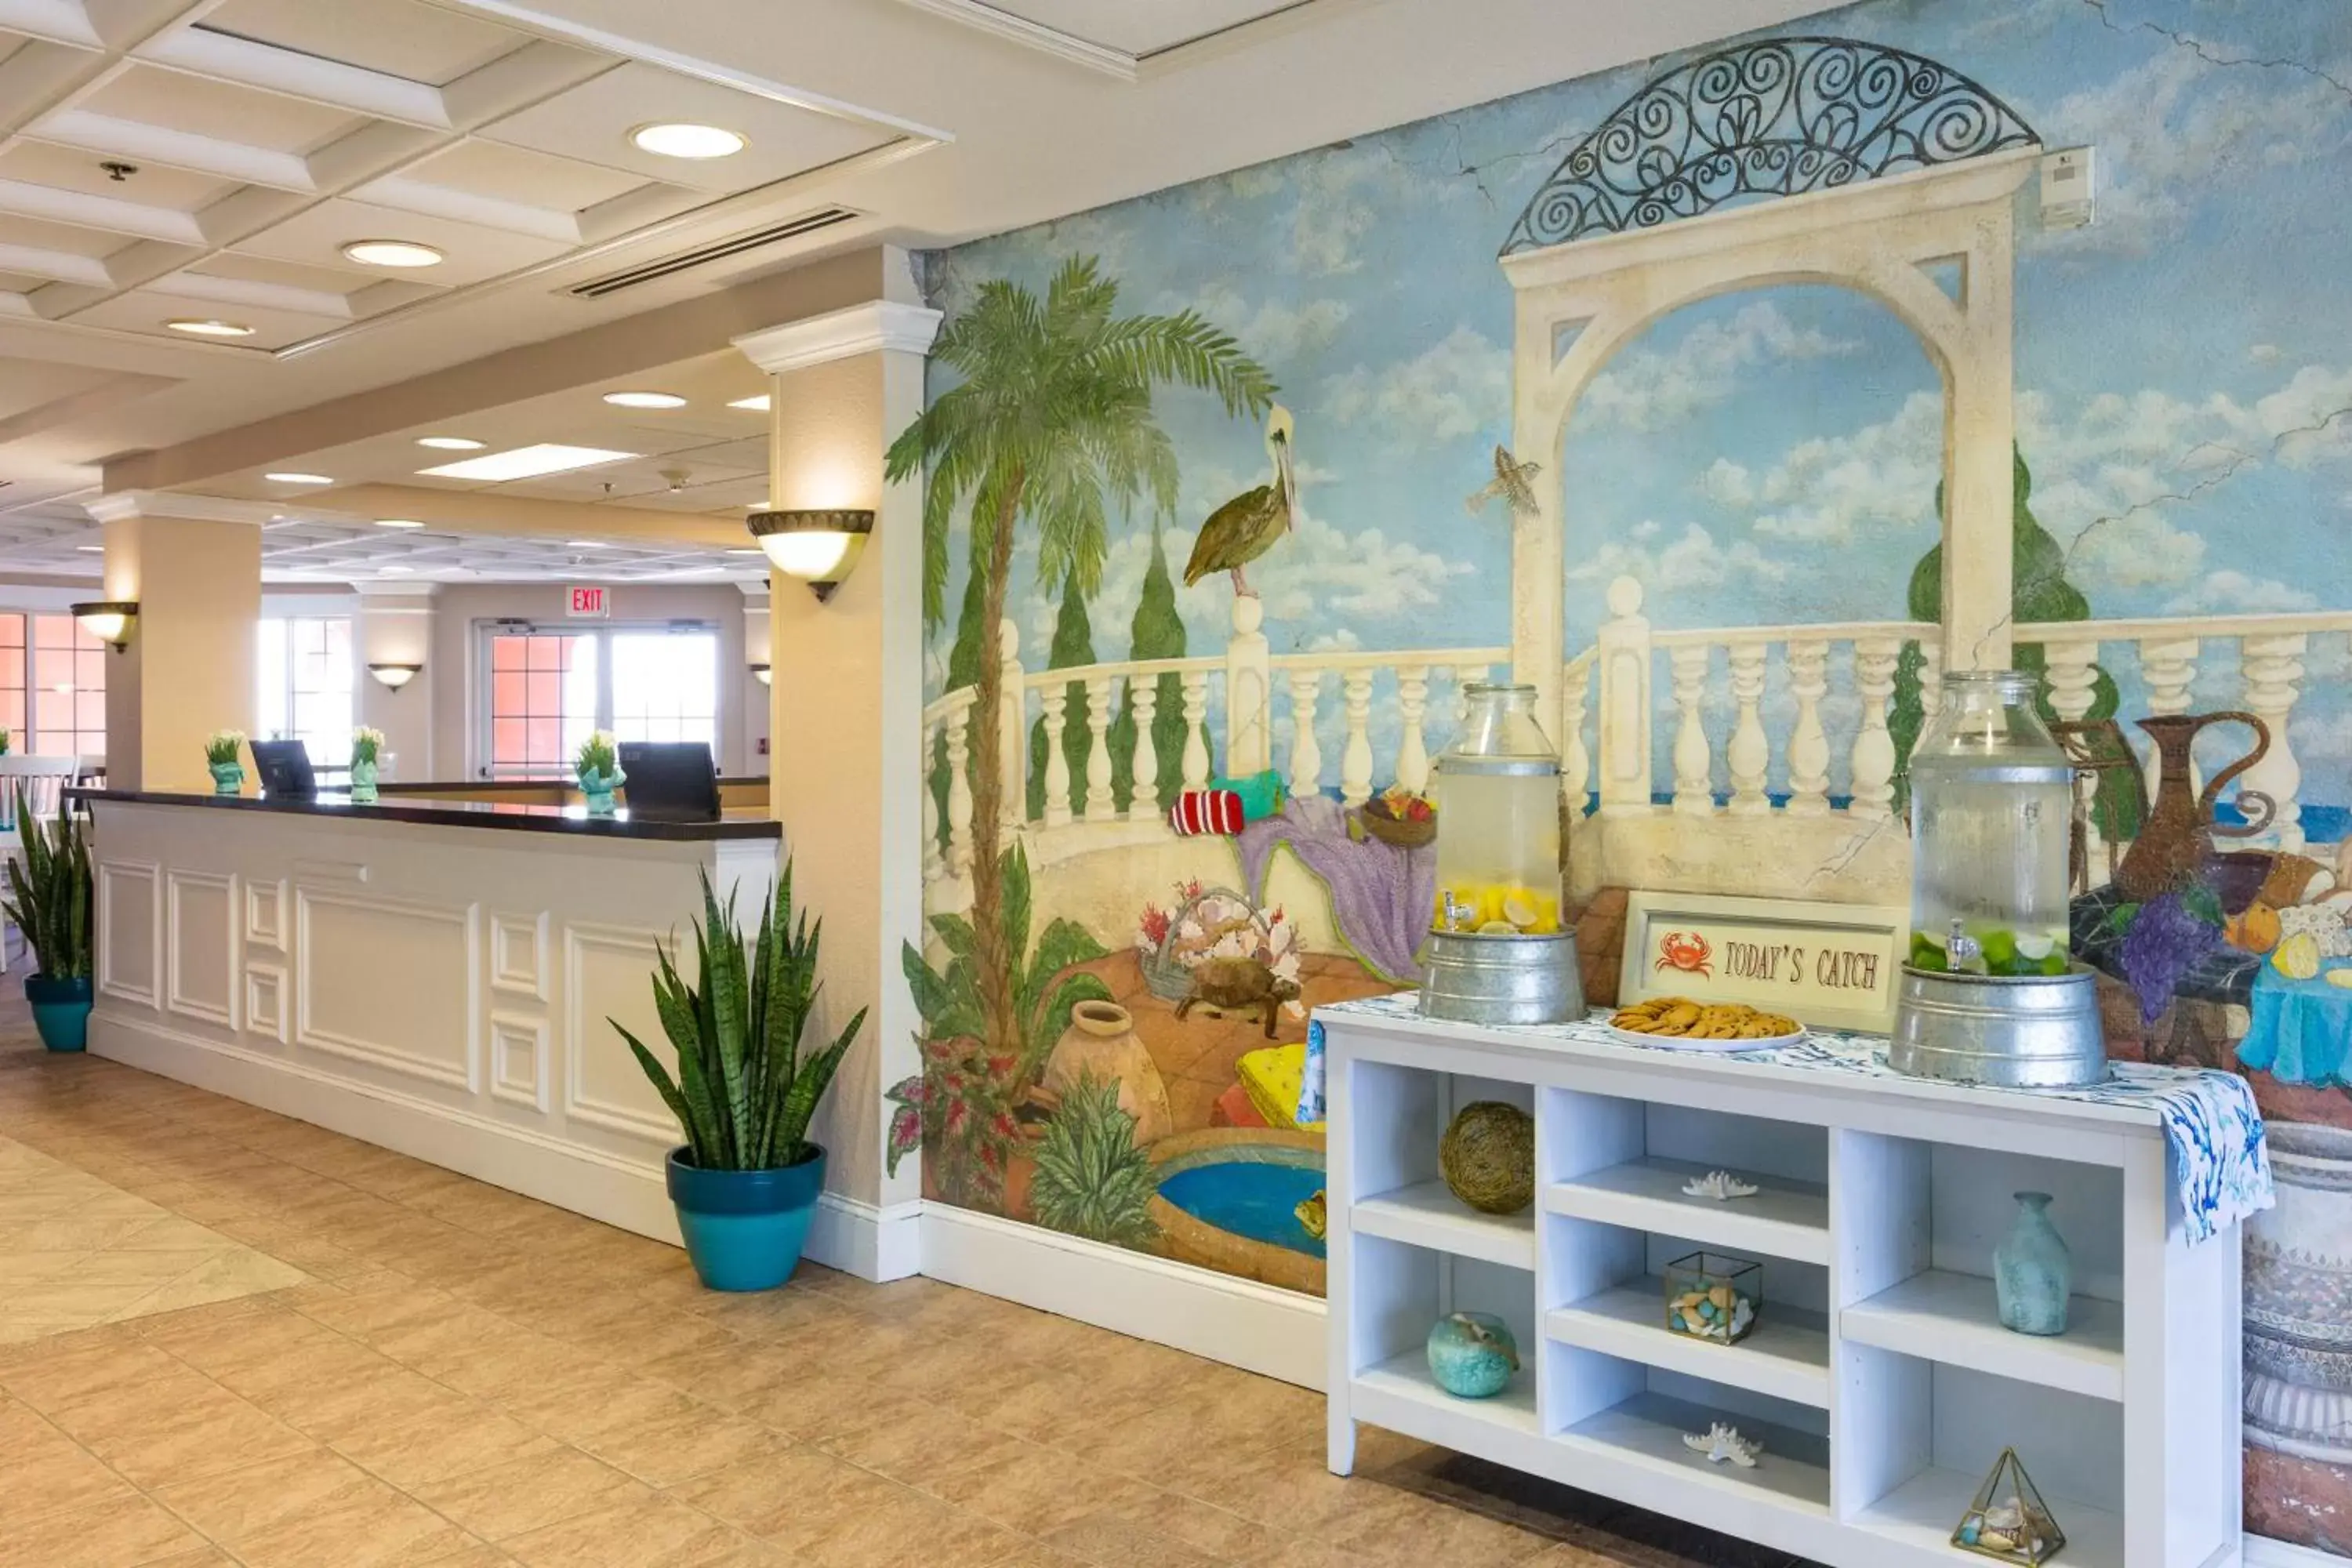 Lobby or reception in Amelia Hotel at the Beach